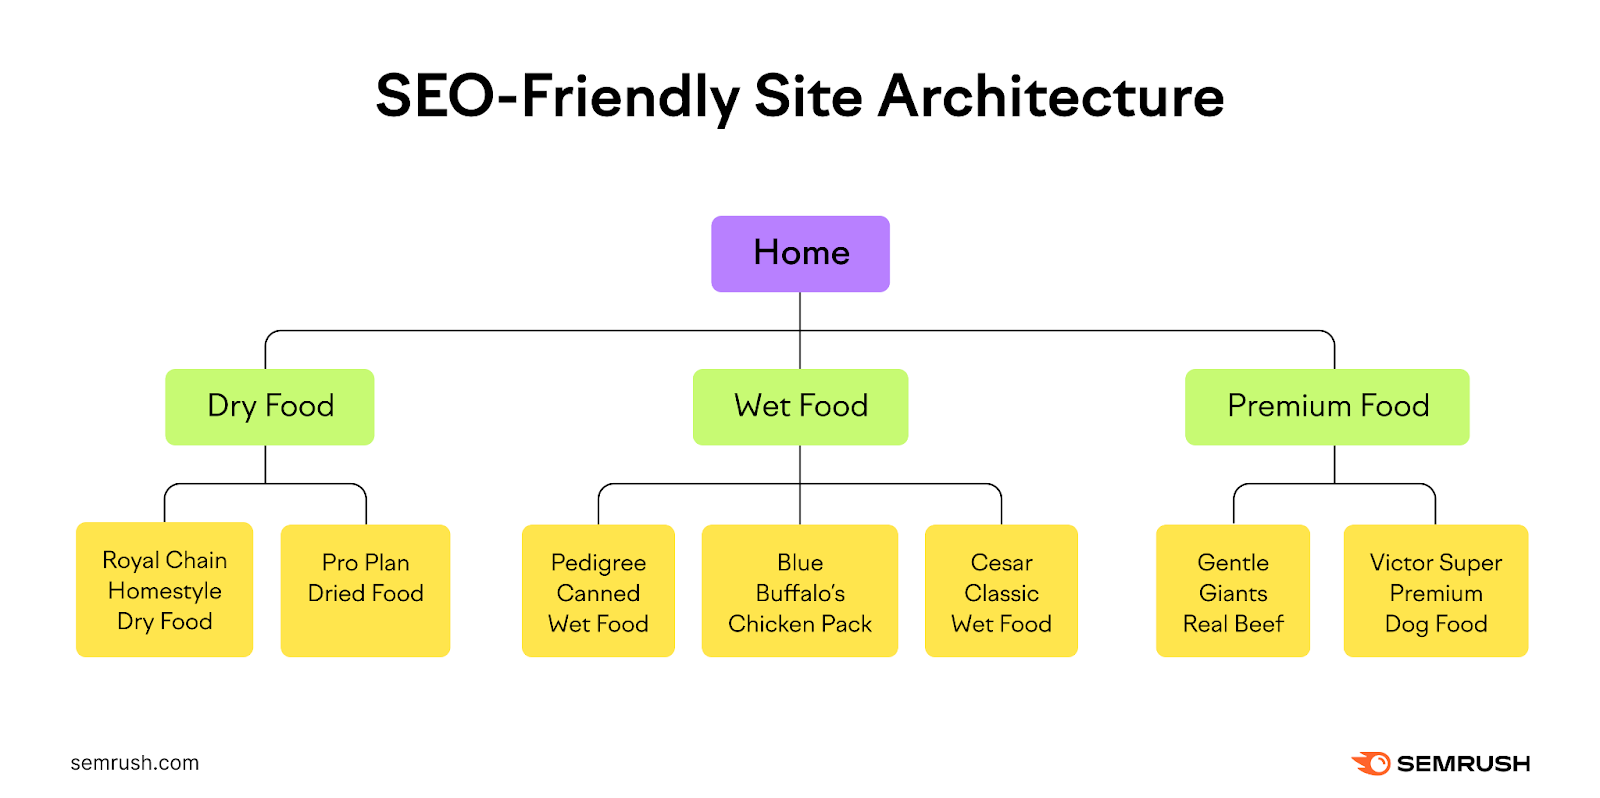 An example of SEO-friendly site architecture with defined categories related to an ecommerce website selling  food